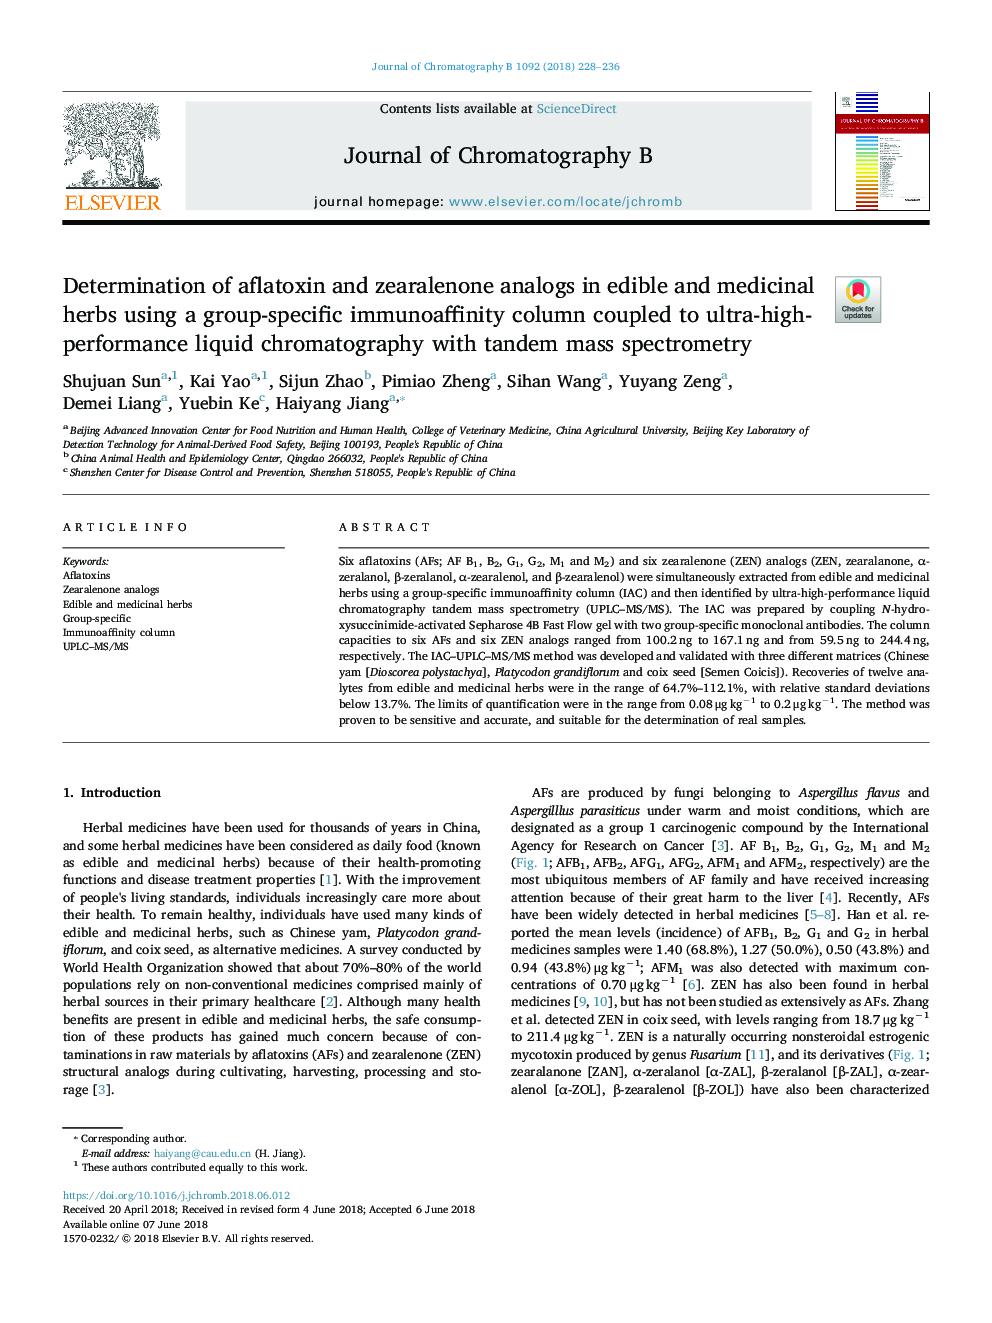 Determination of aflatoxin and zearalenone analogs in edible and medicinal herbs using a group-specific immunoaffinity column coupled to ultra-high-performance liquid chromatography with tandem mass spectrometry